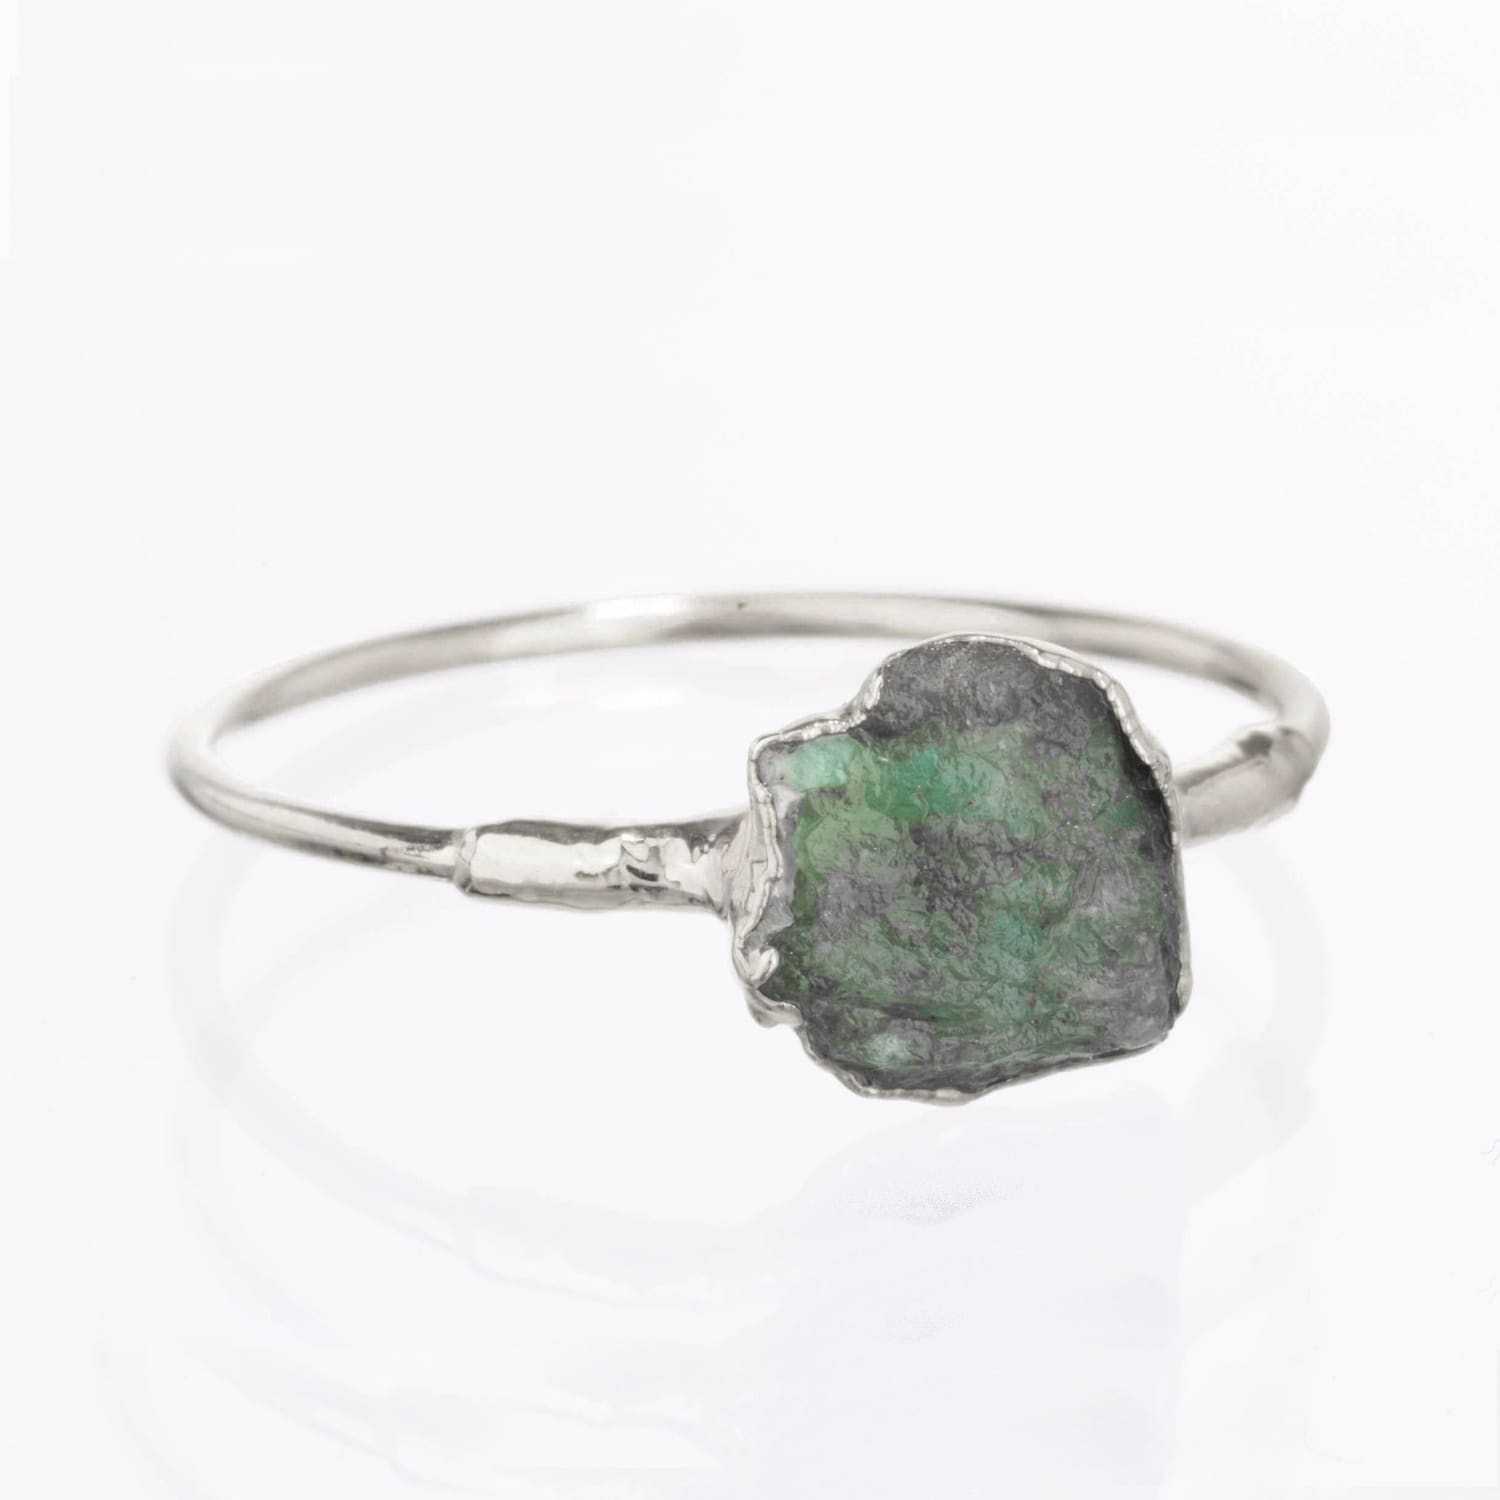 Raw Emerald Ring in Sterling Silver Gemstone Jewelry Rough